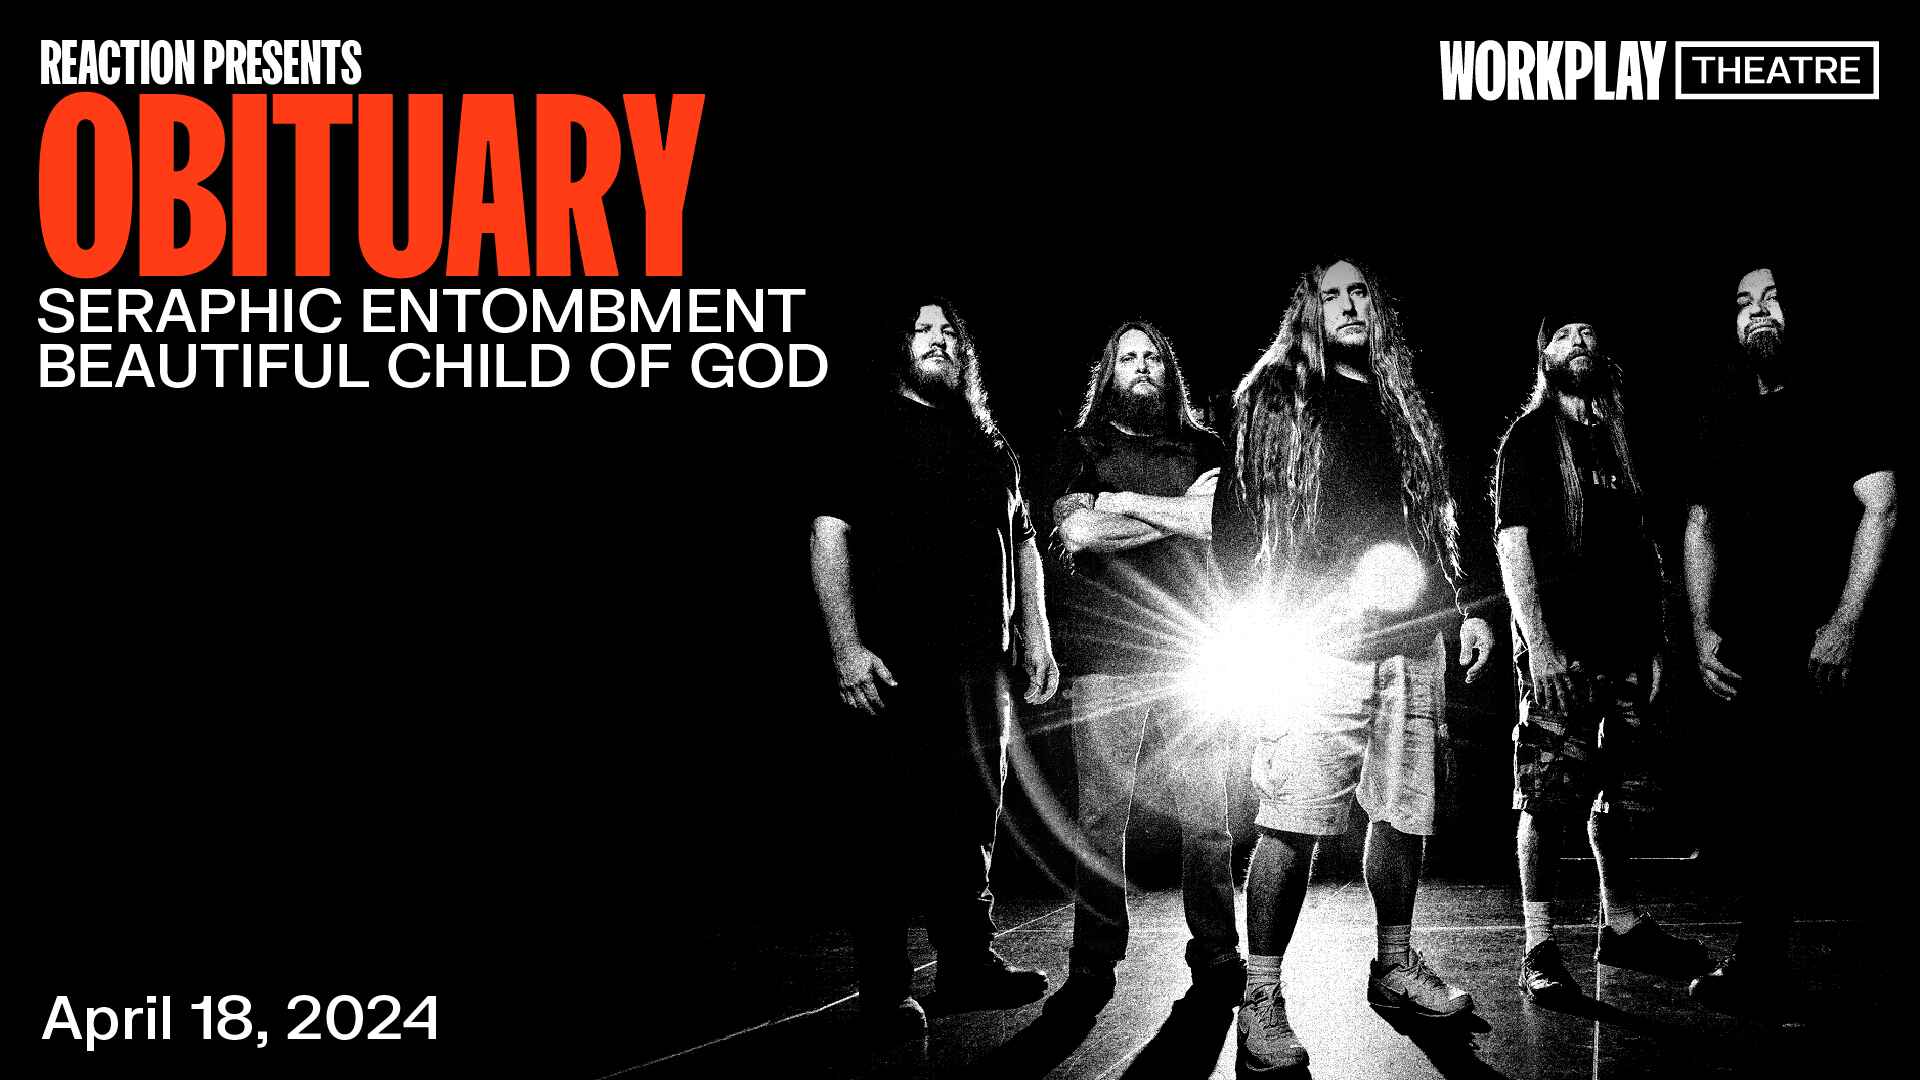 OBITUARY in concert